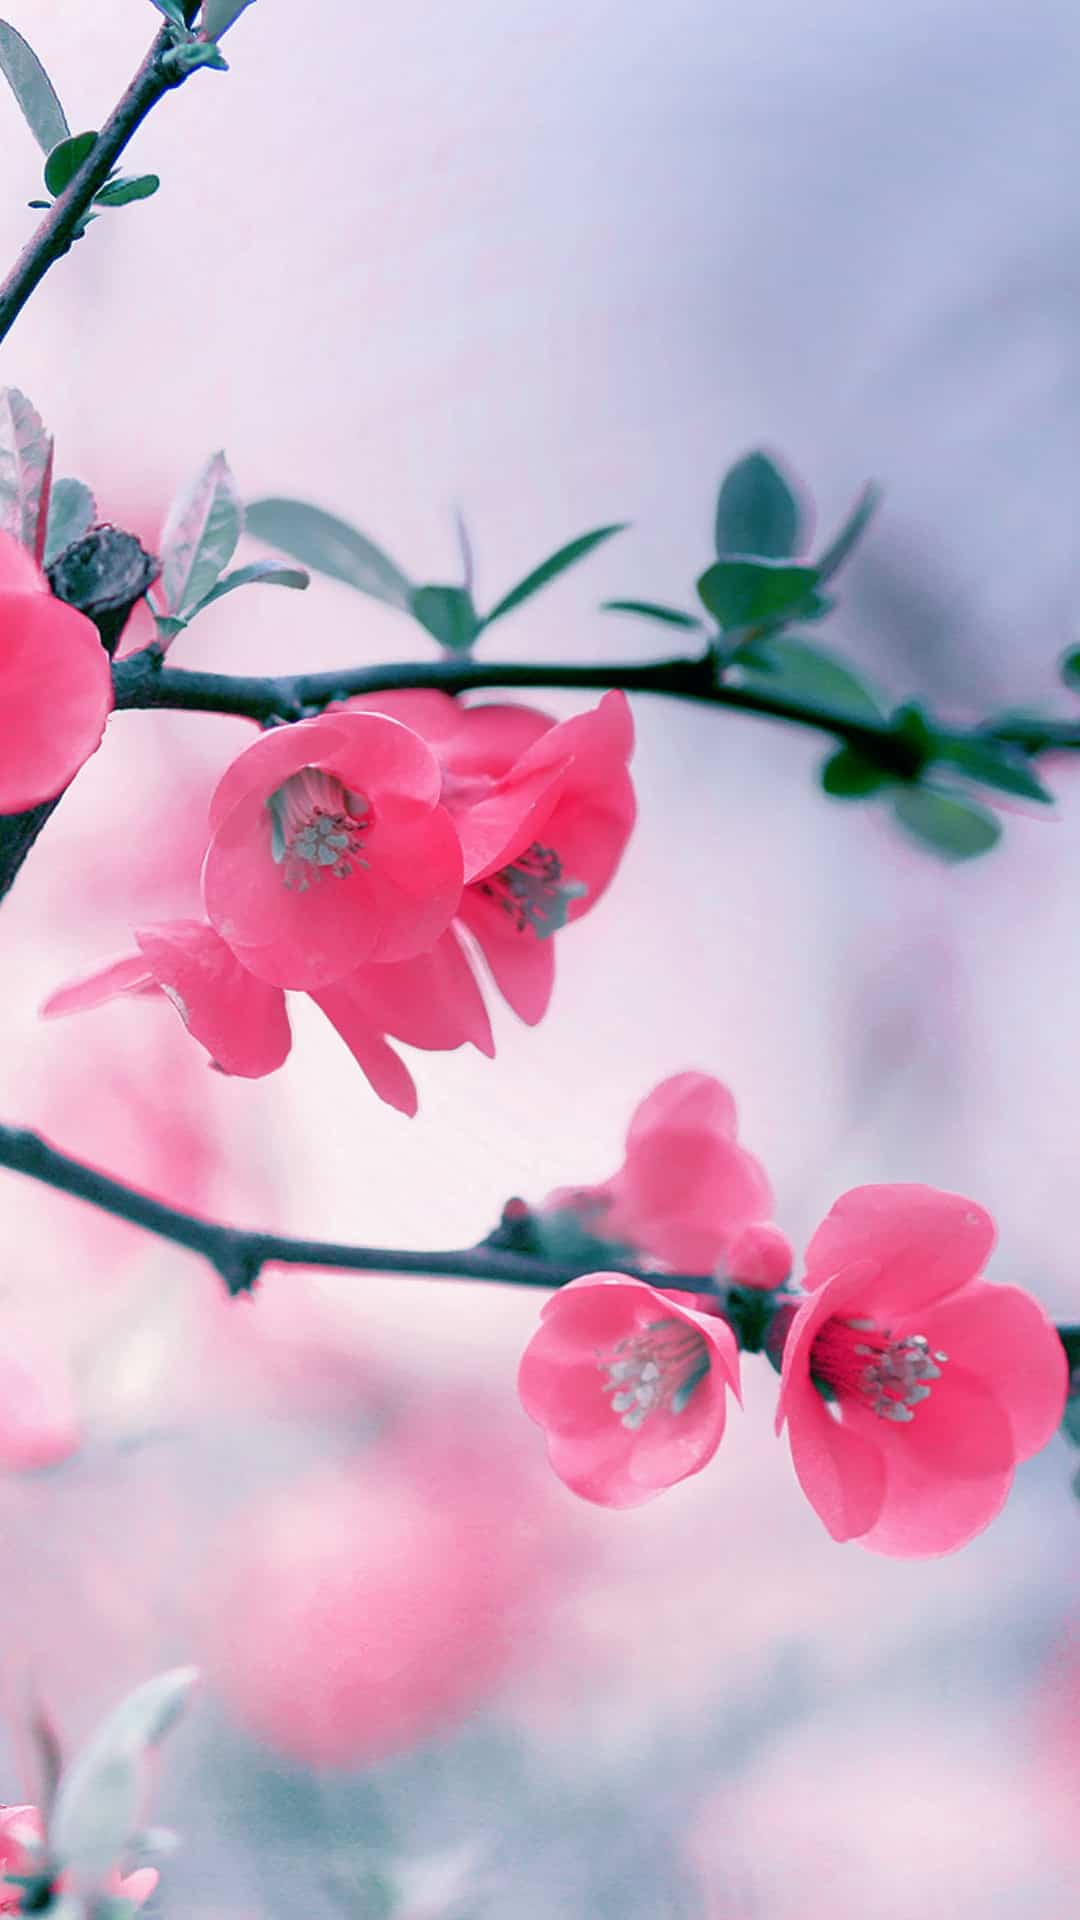 Vintage Pink Blossom Flowers Spring Macro Android Wallpaper - Hd Wallpaper Download For Mobile Screen - HD Wallpaper 